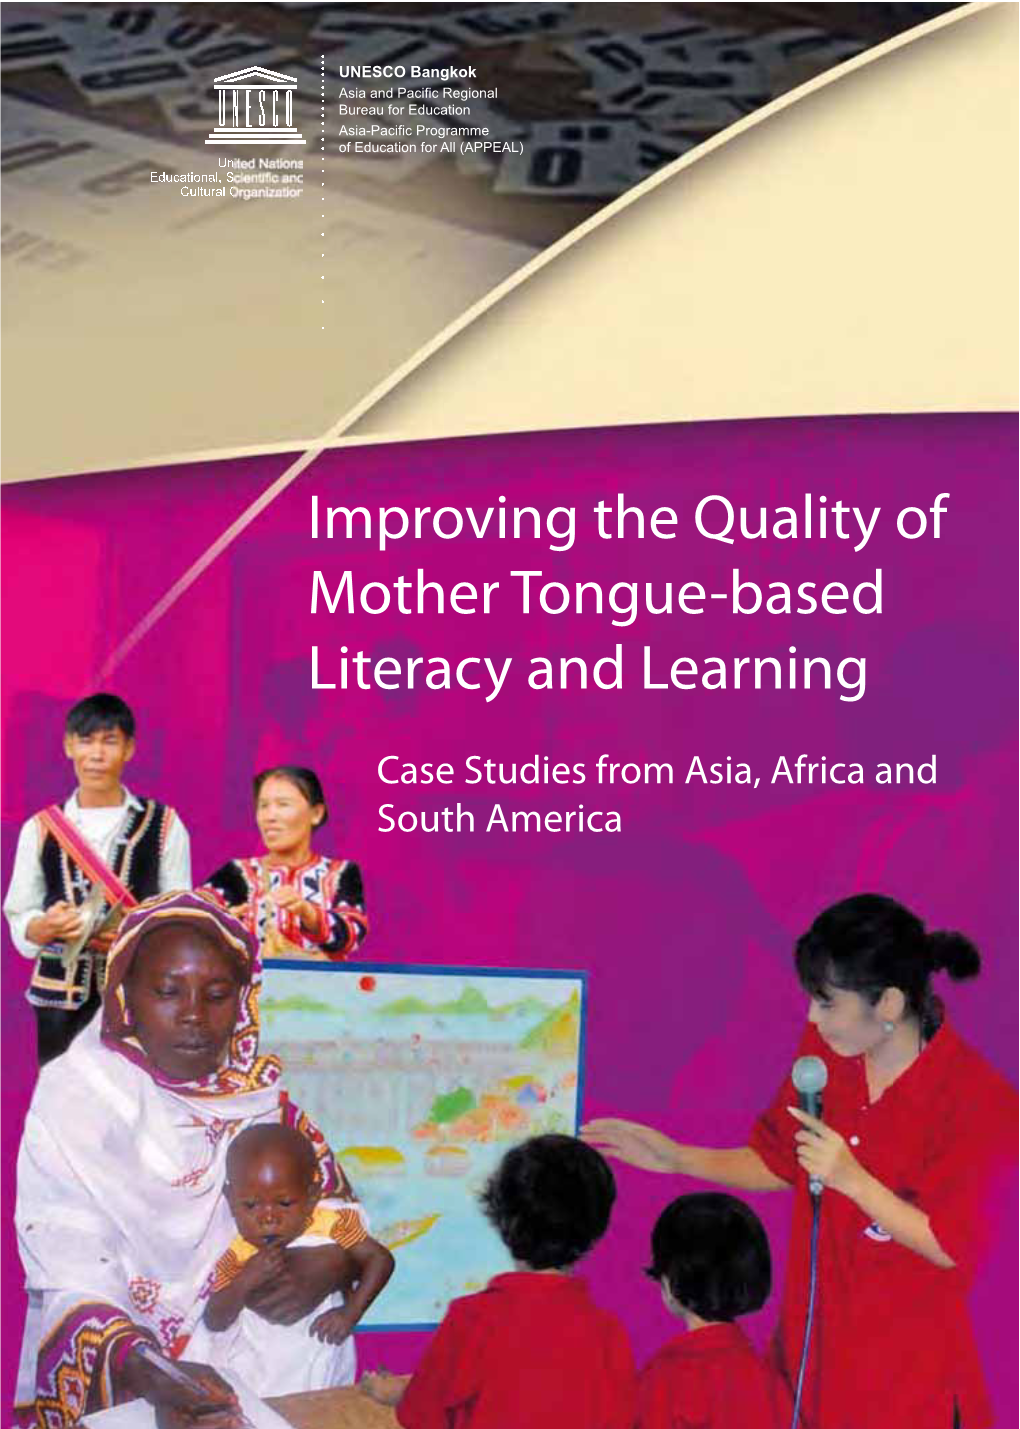 Improving the Quality of Mother Tongue-Based Literacy and Learning